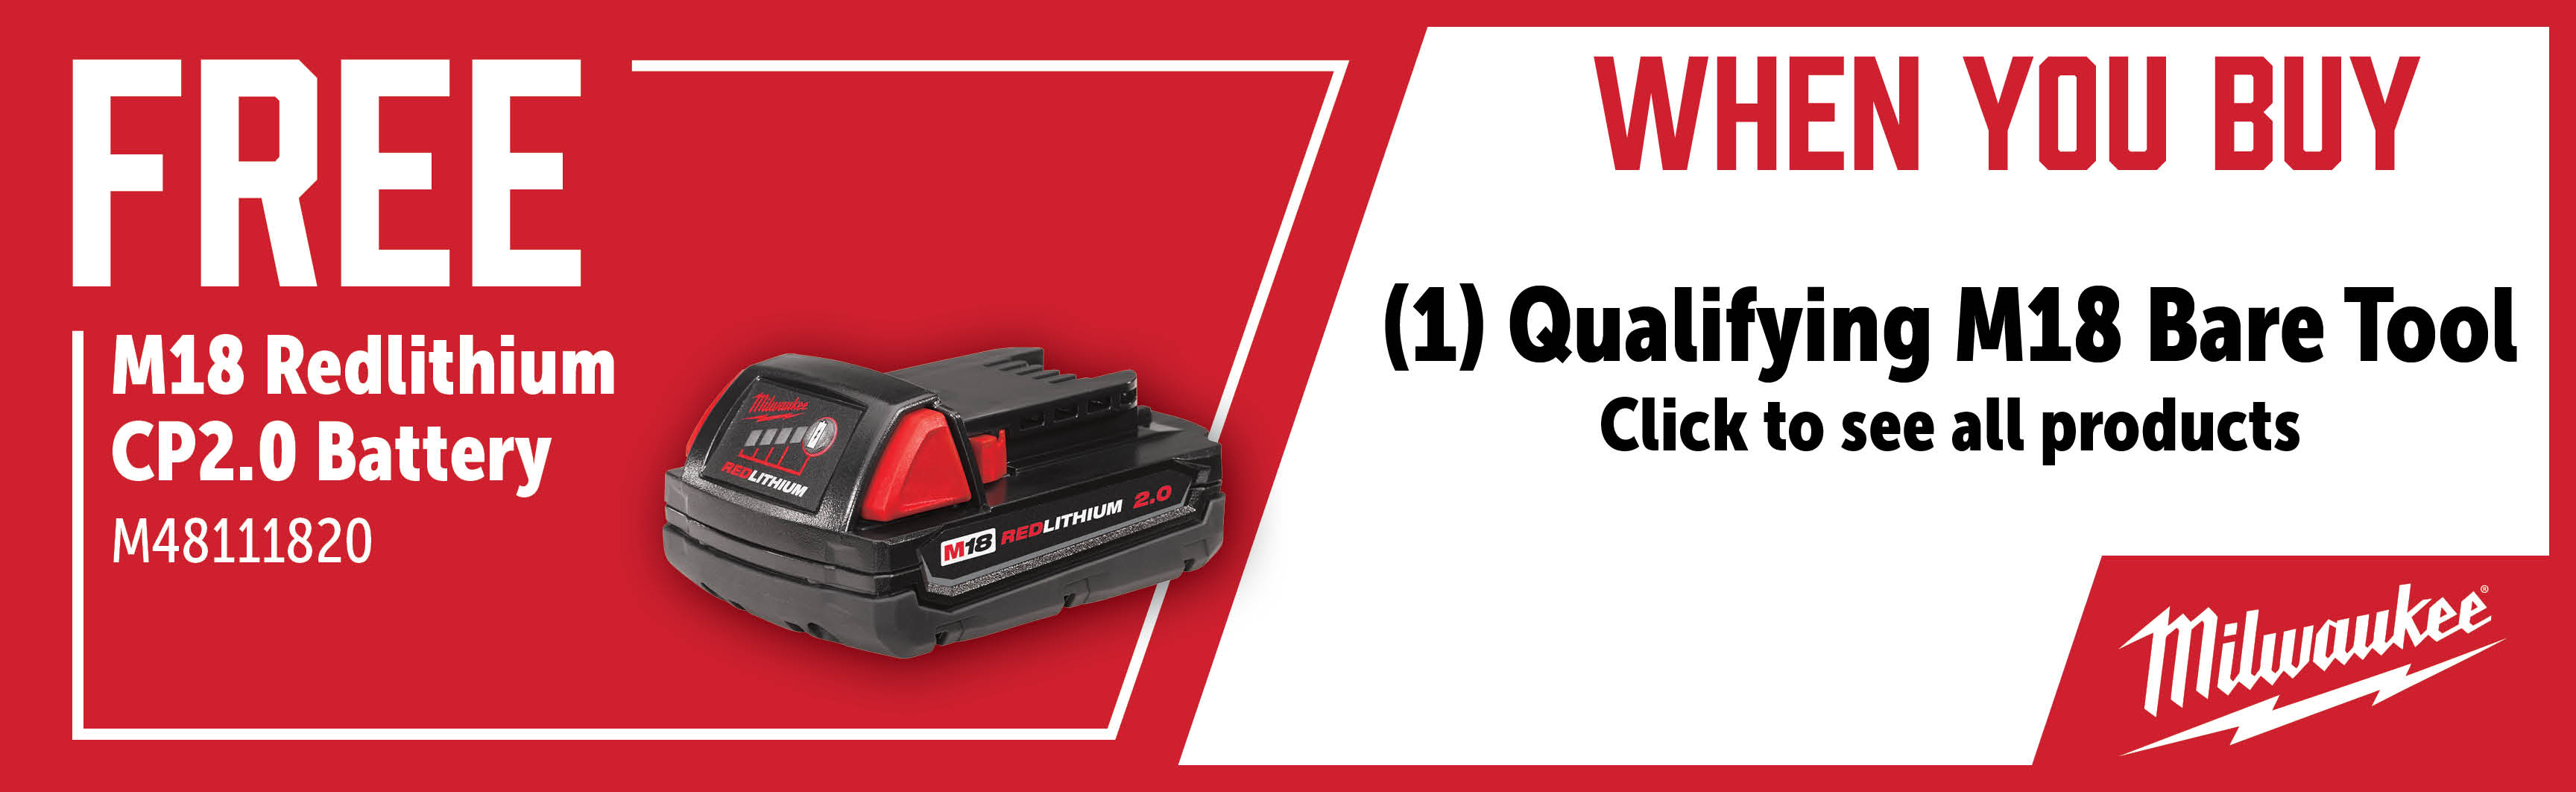 Milwaukee Aug-Oct: Buy a Qualifying M18 Bare Tool and Get a Free M48111820